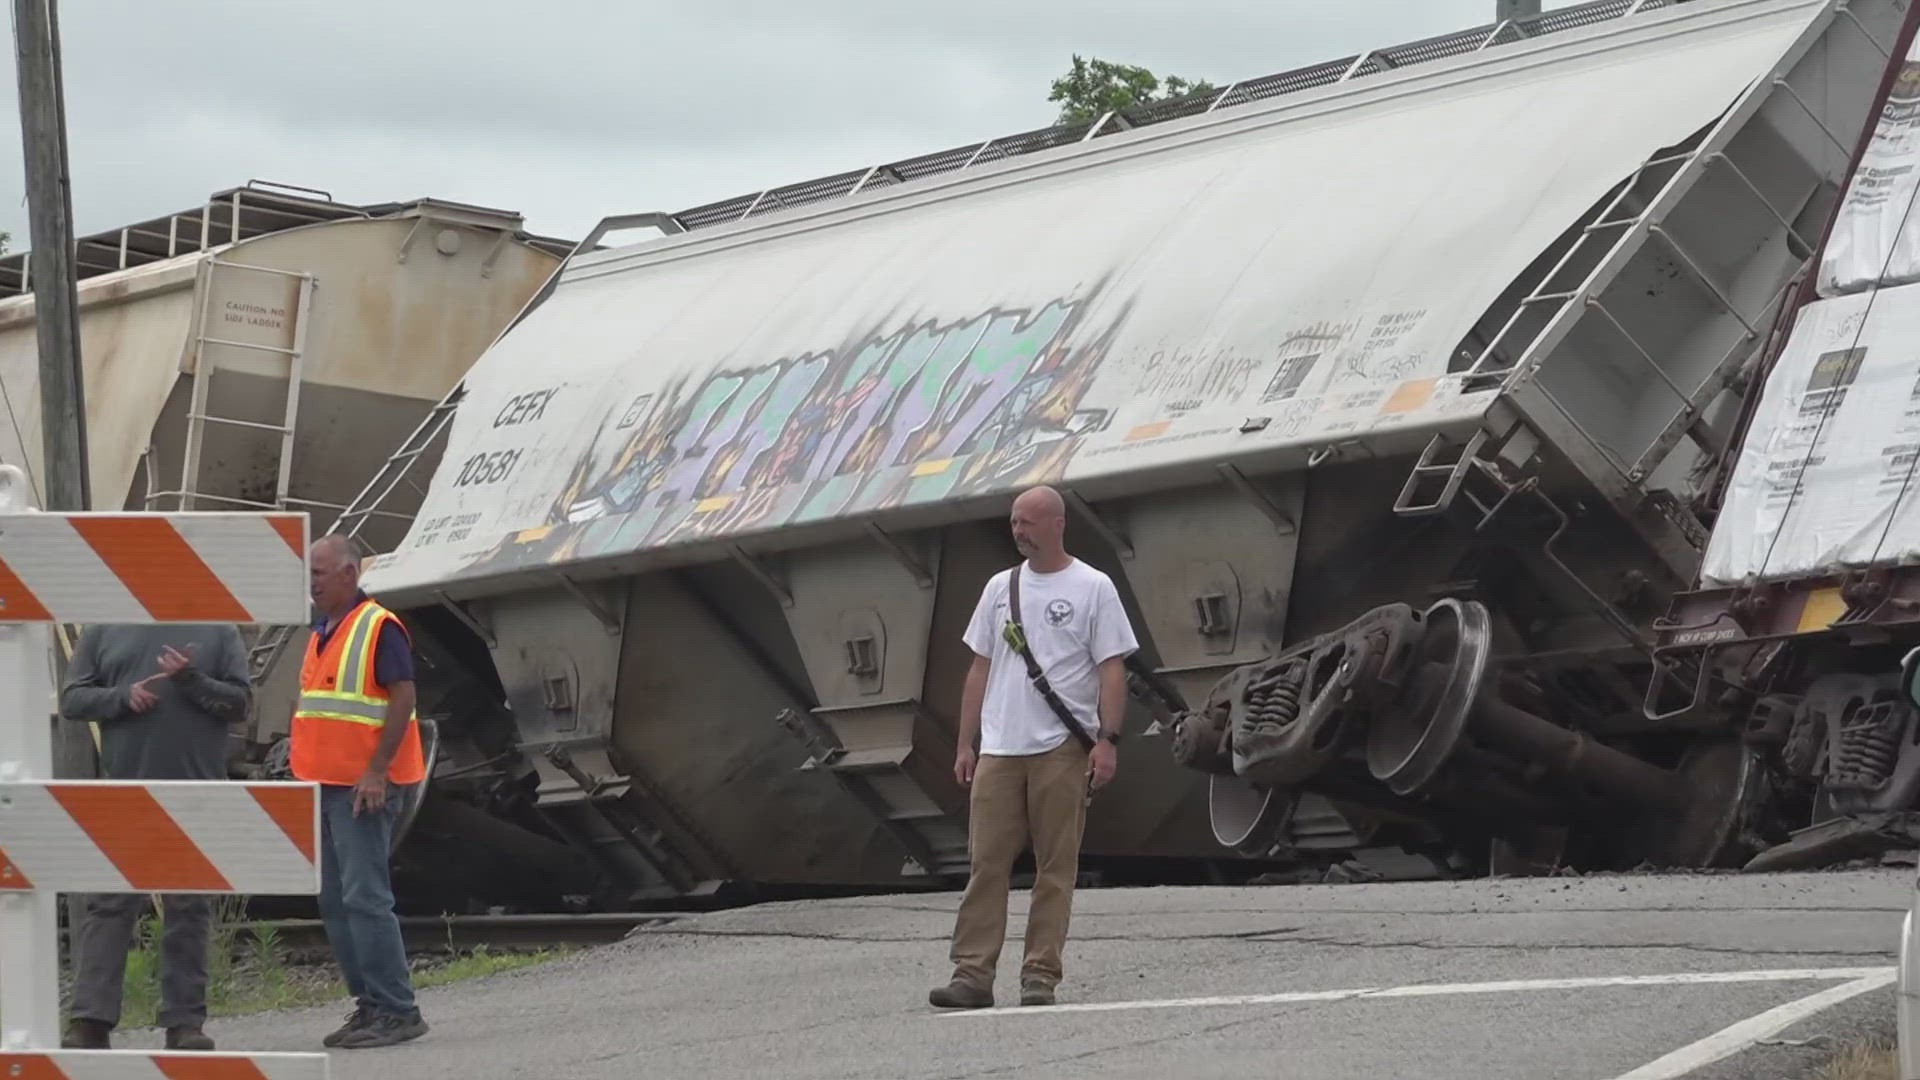 Multiple train cars carrying commercial products overturned. Repairs to the railroad are expected to take three to four days, the LaFollette Police Chief said.